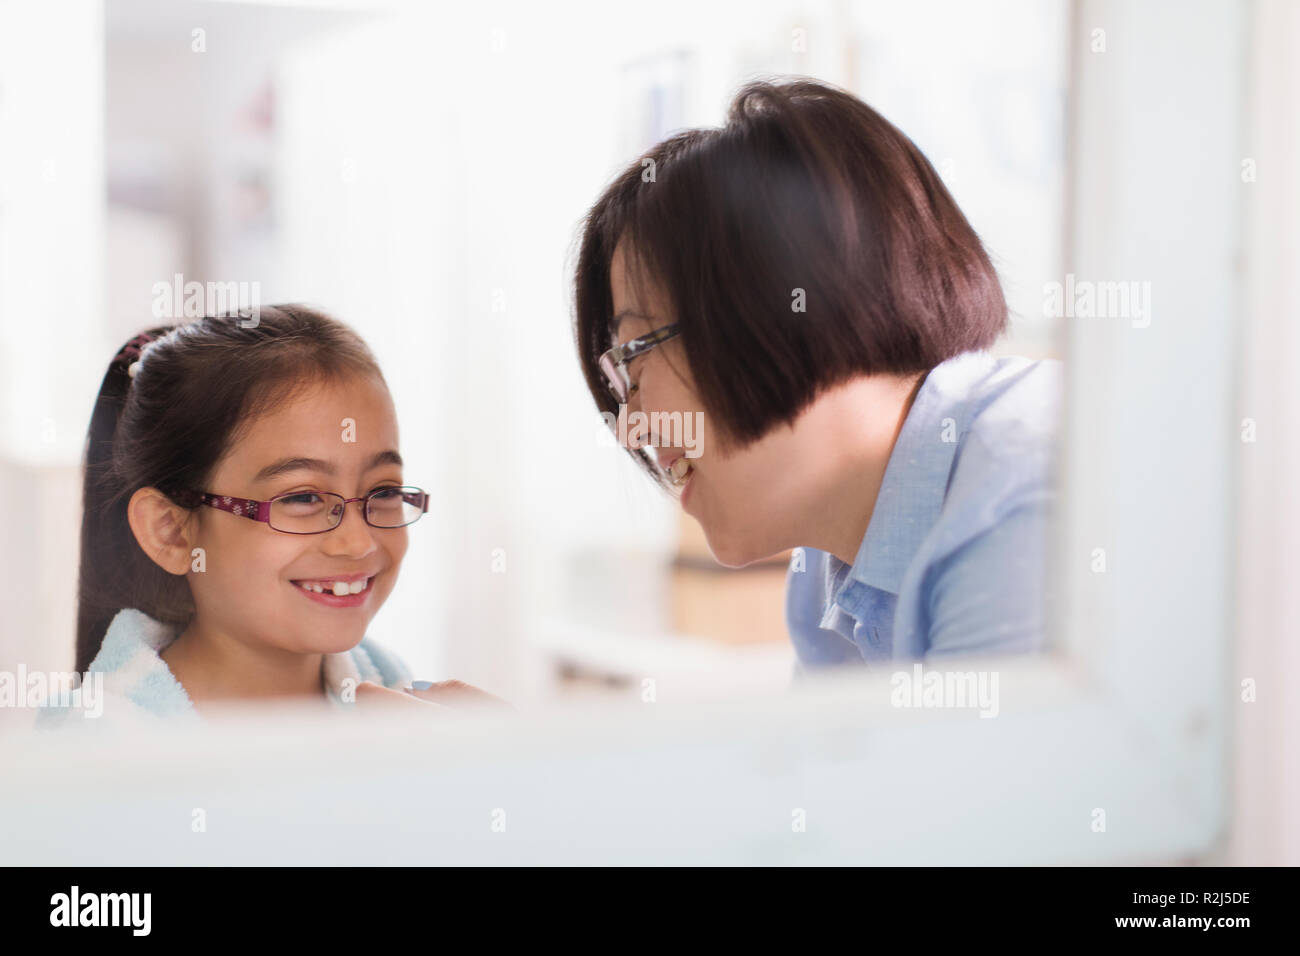 Reflection of mother and daughter in bathroom mirror Stock Photo